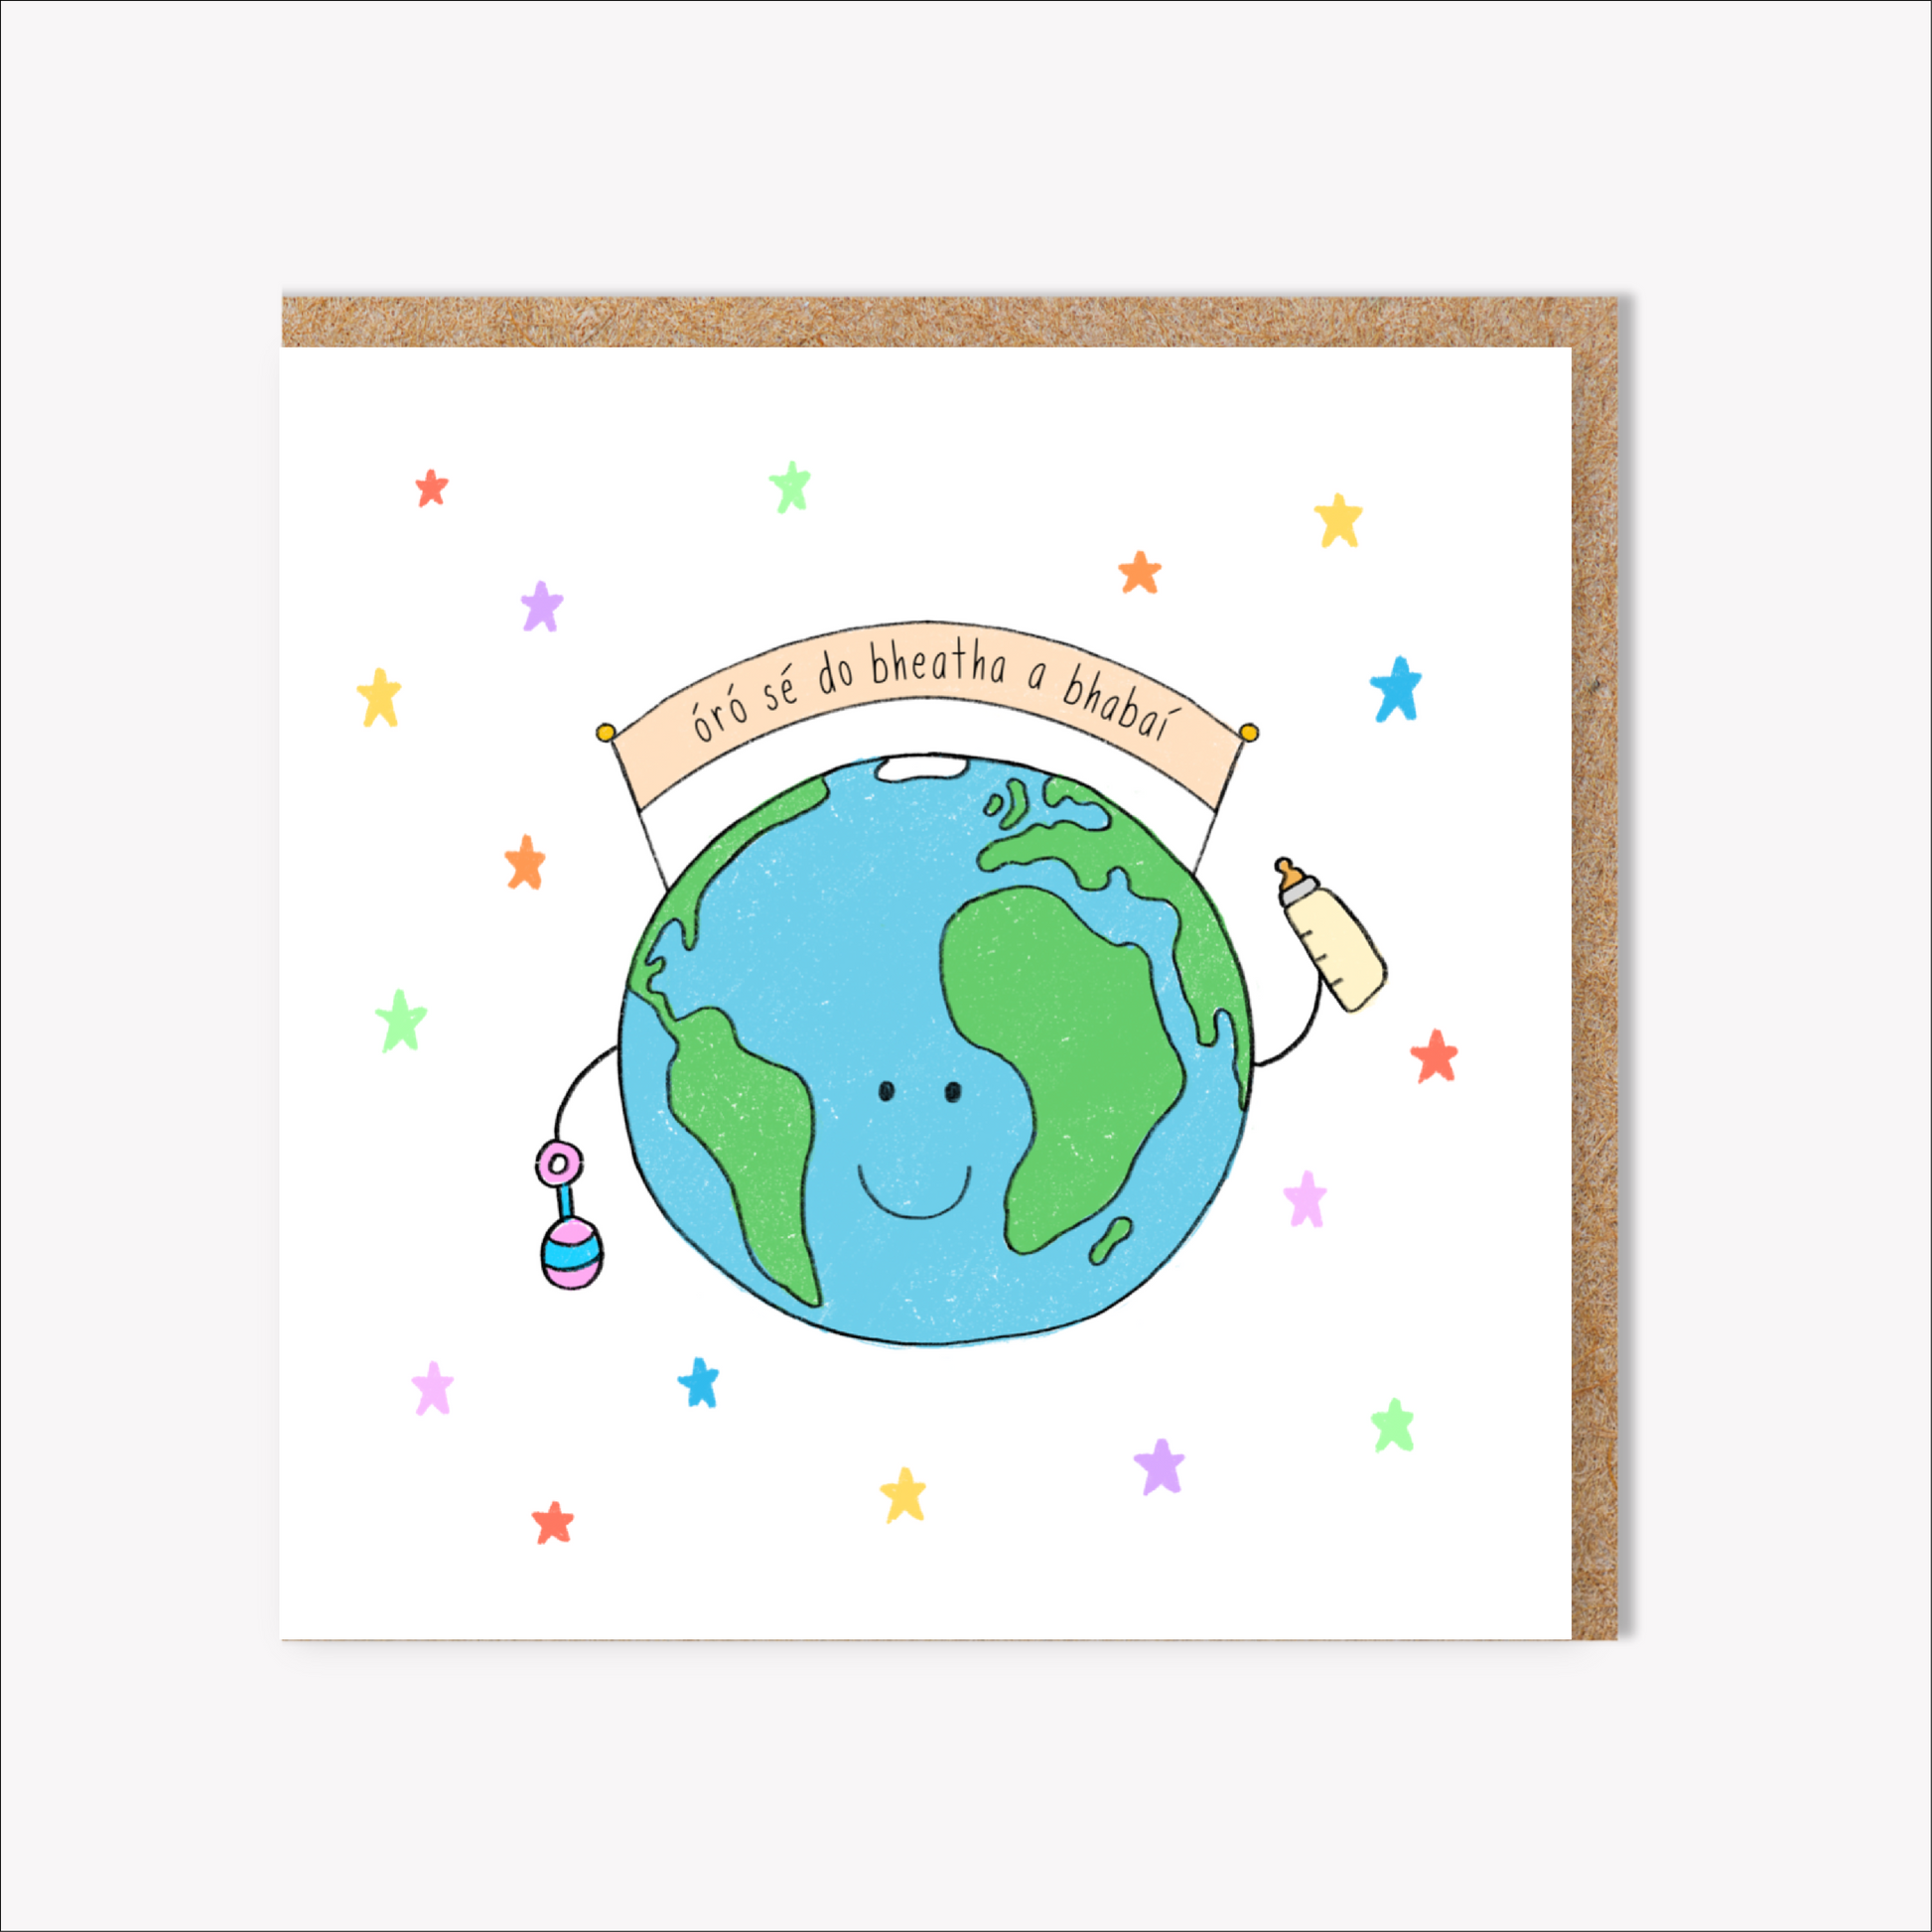 Welcome to the world kiddo - Irish Baby Card - Connect The Dots Design